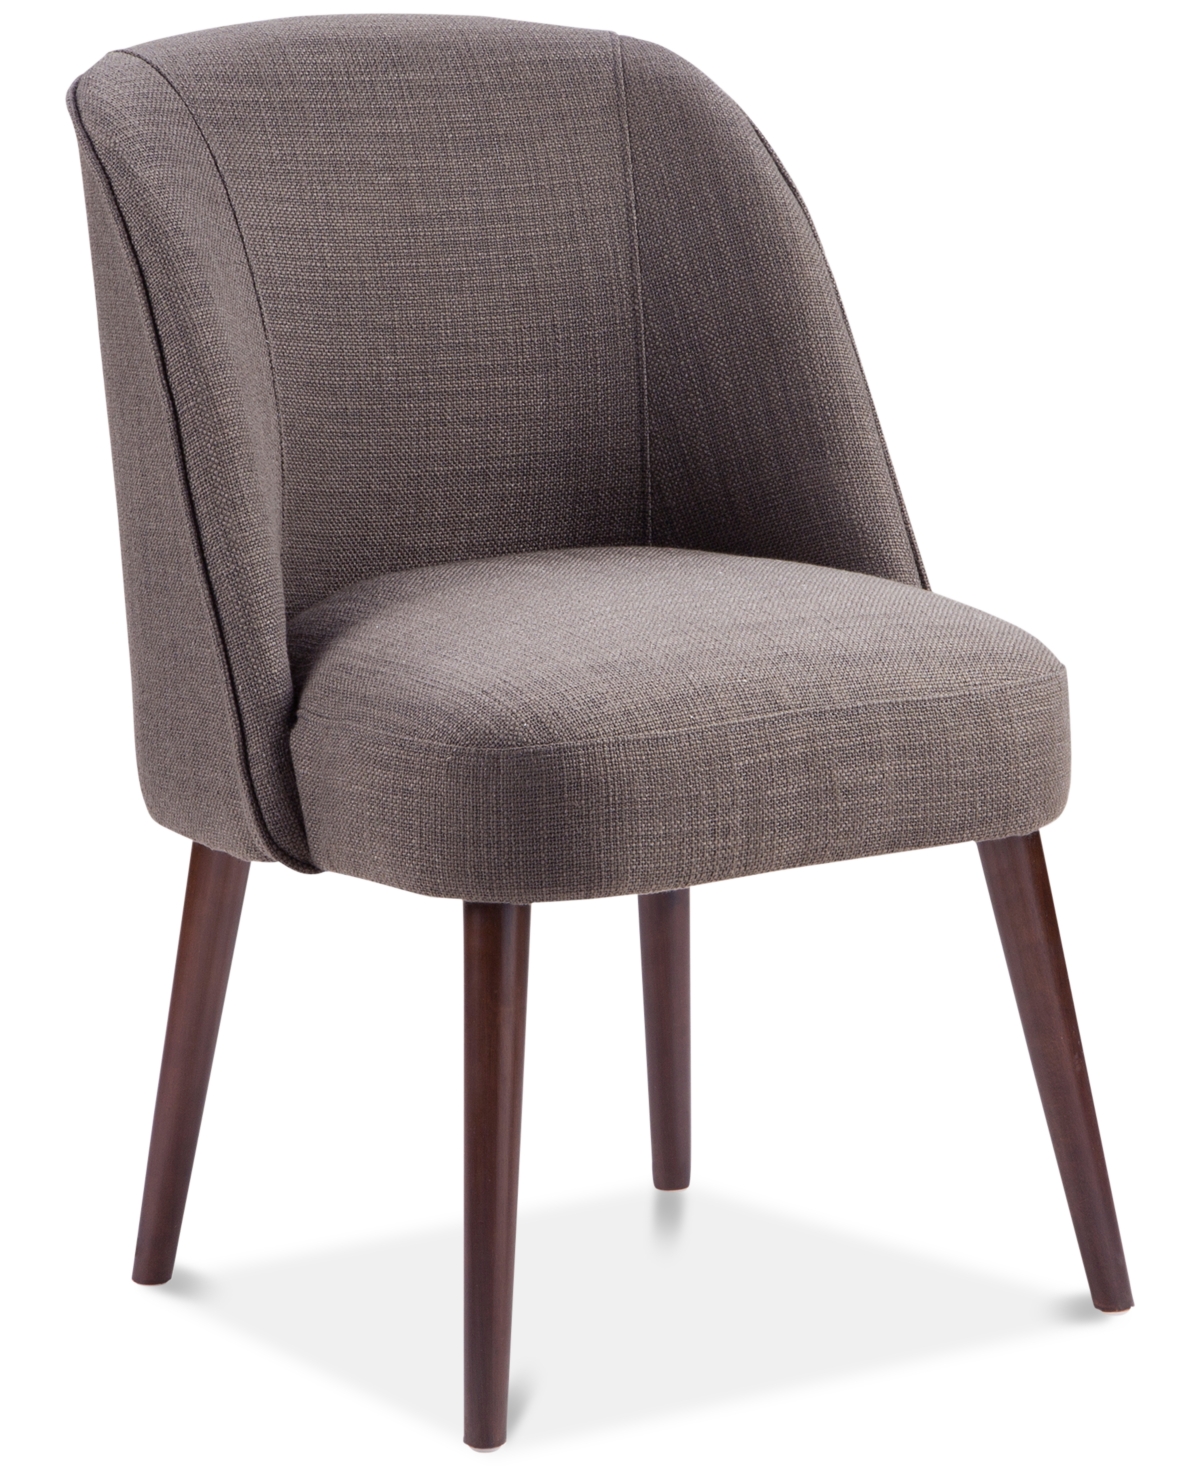 4626346 Bradley Rounded Back Dining Chair sku 4626346